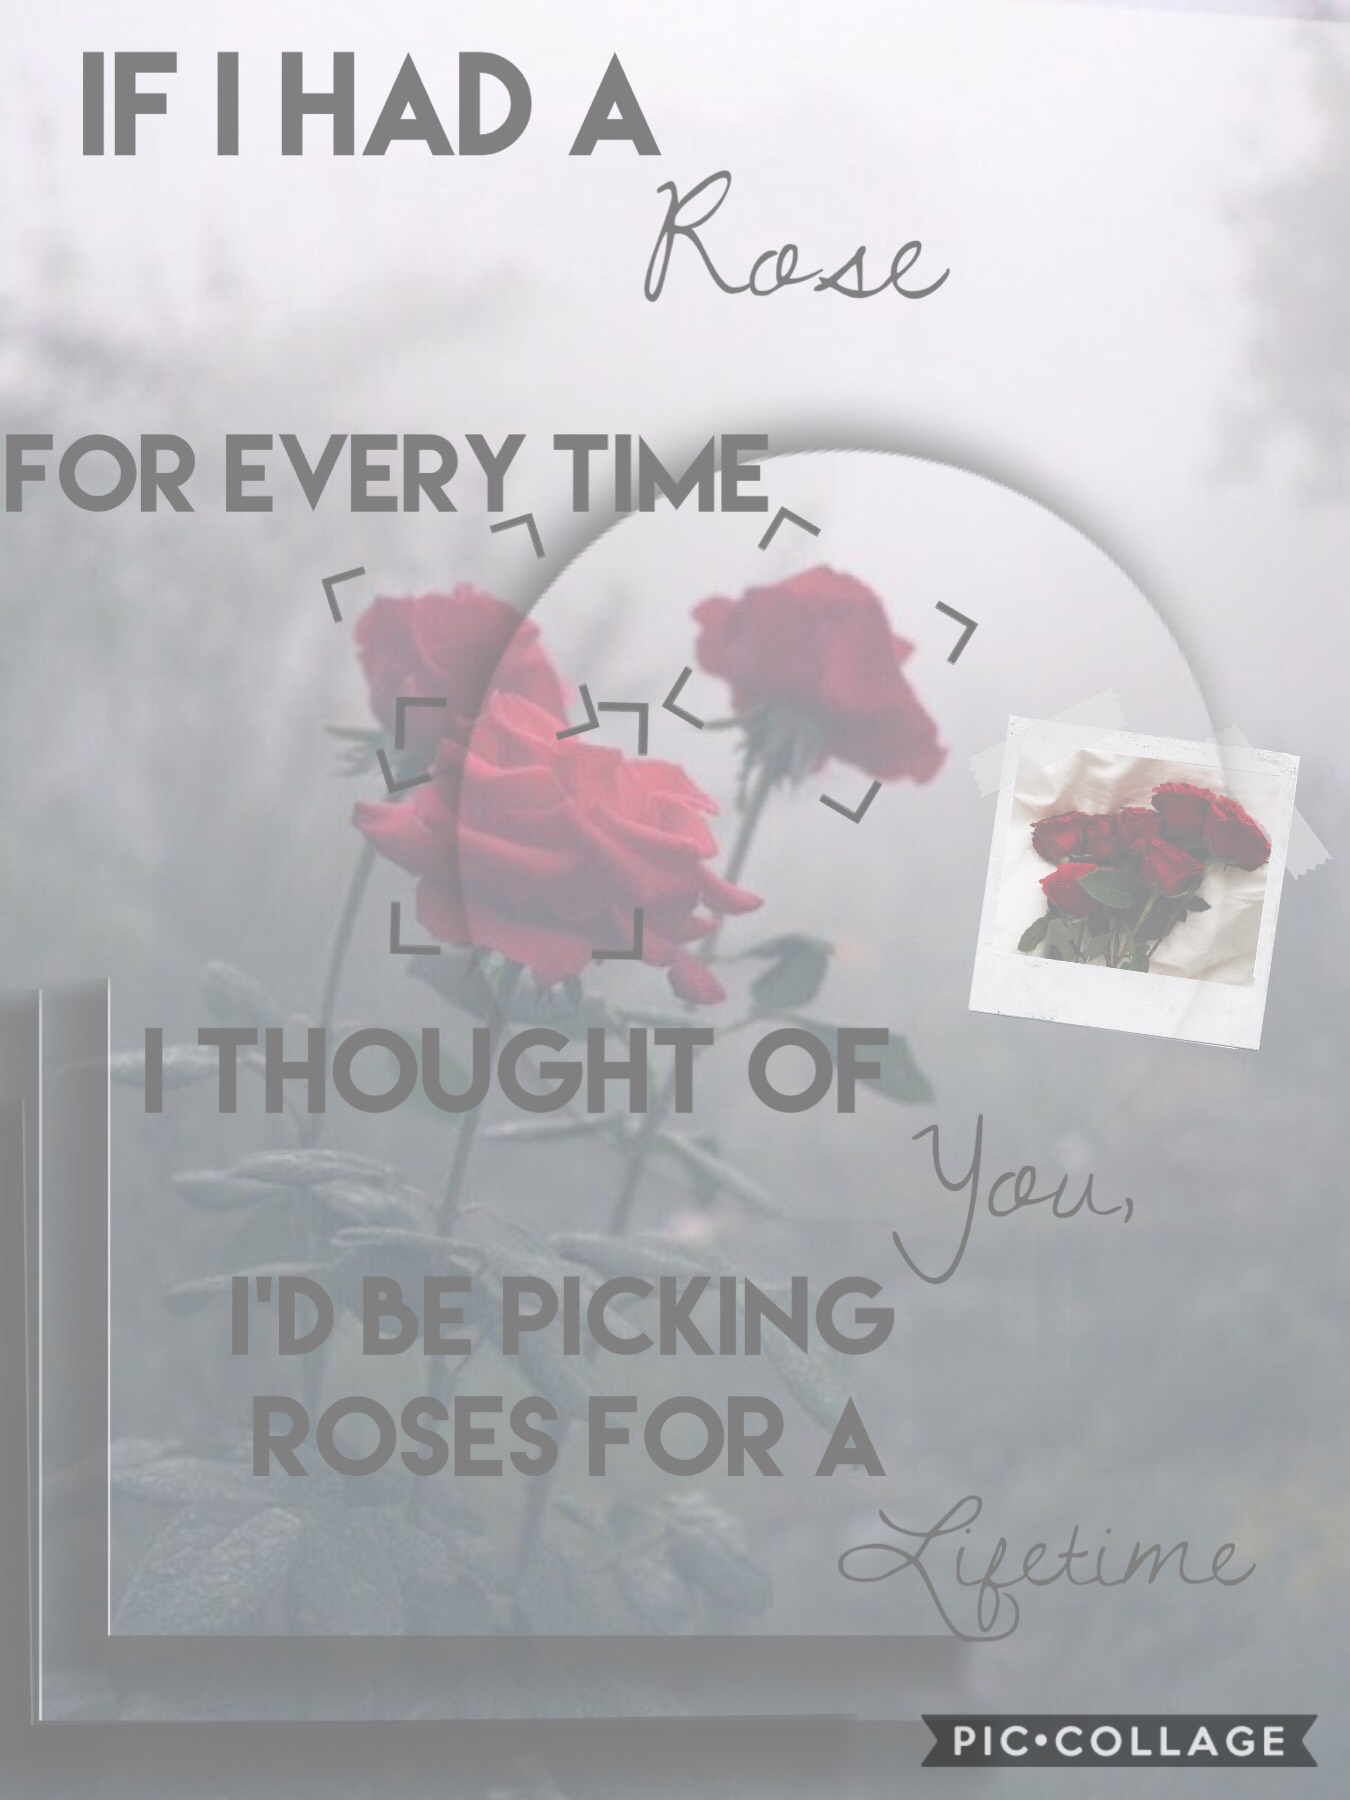 🌹TAPPPP🌹 


I had to post this I was too impatient I love this one😍 (mostly bc there are roses) anywaysss I hope you guys have a great day!❤️